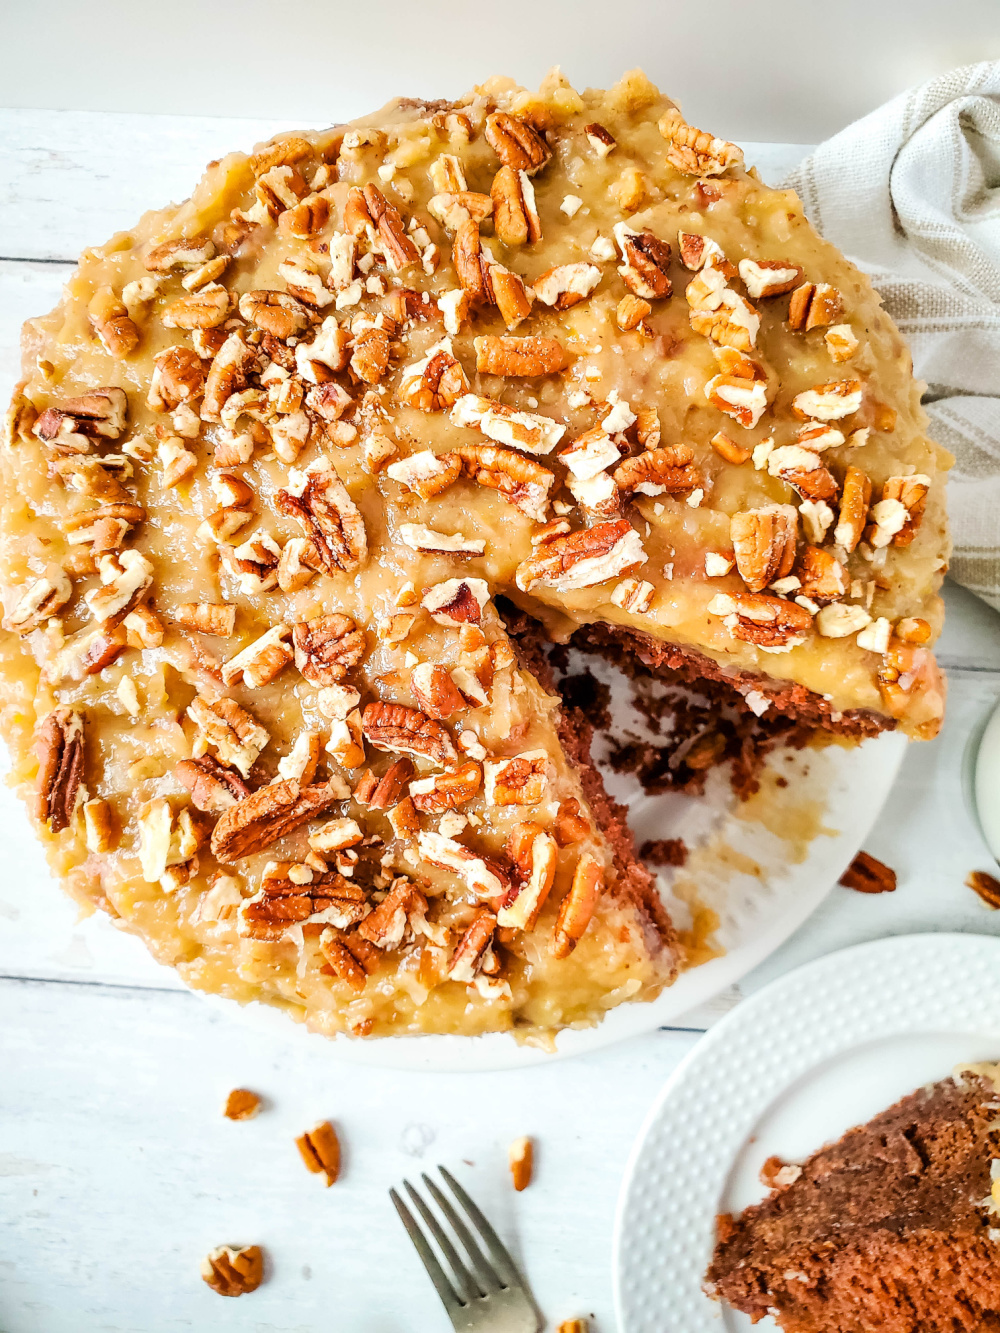 Homemade German Chocolate Cake with Coconut Pecan Frosting